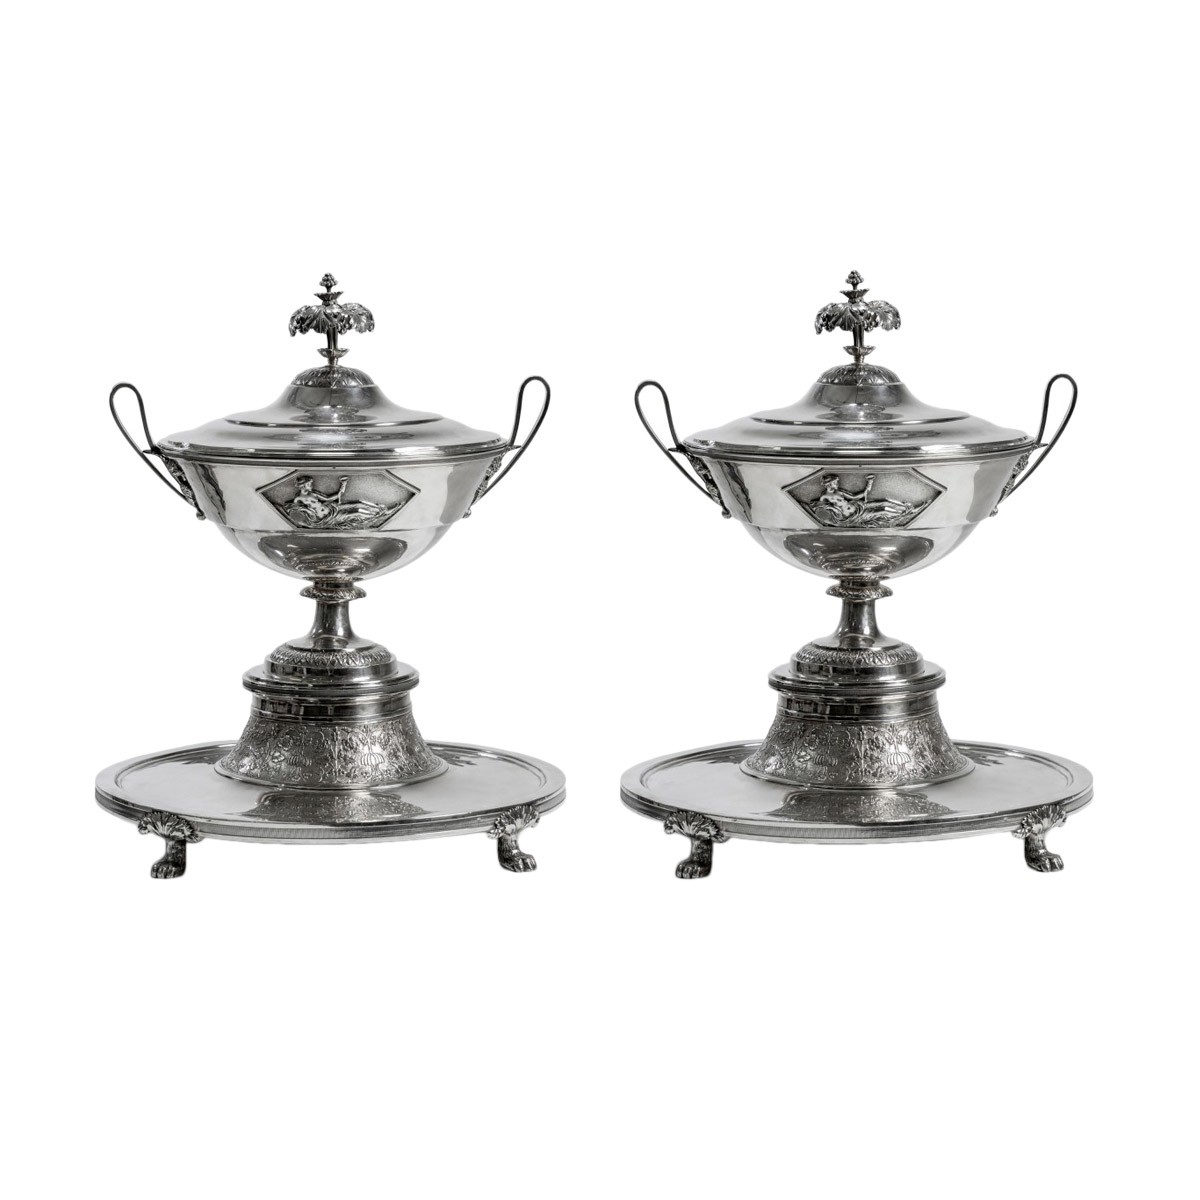 TUREENS, a pair, sterling, silver. Louis XV-style. French export